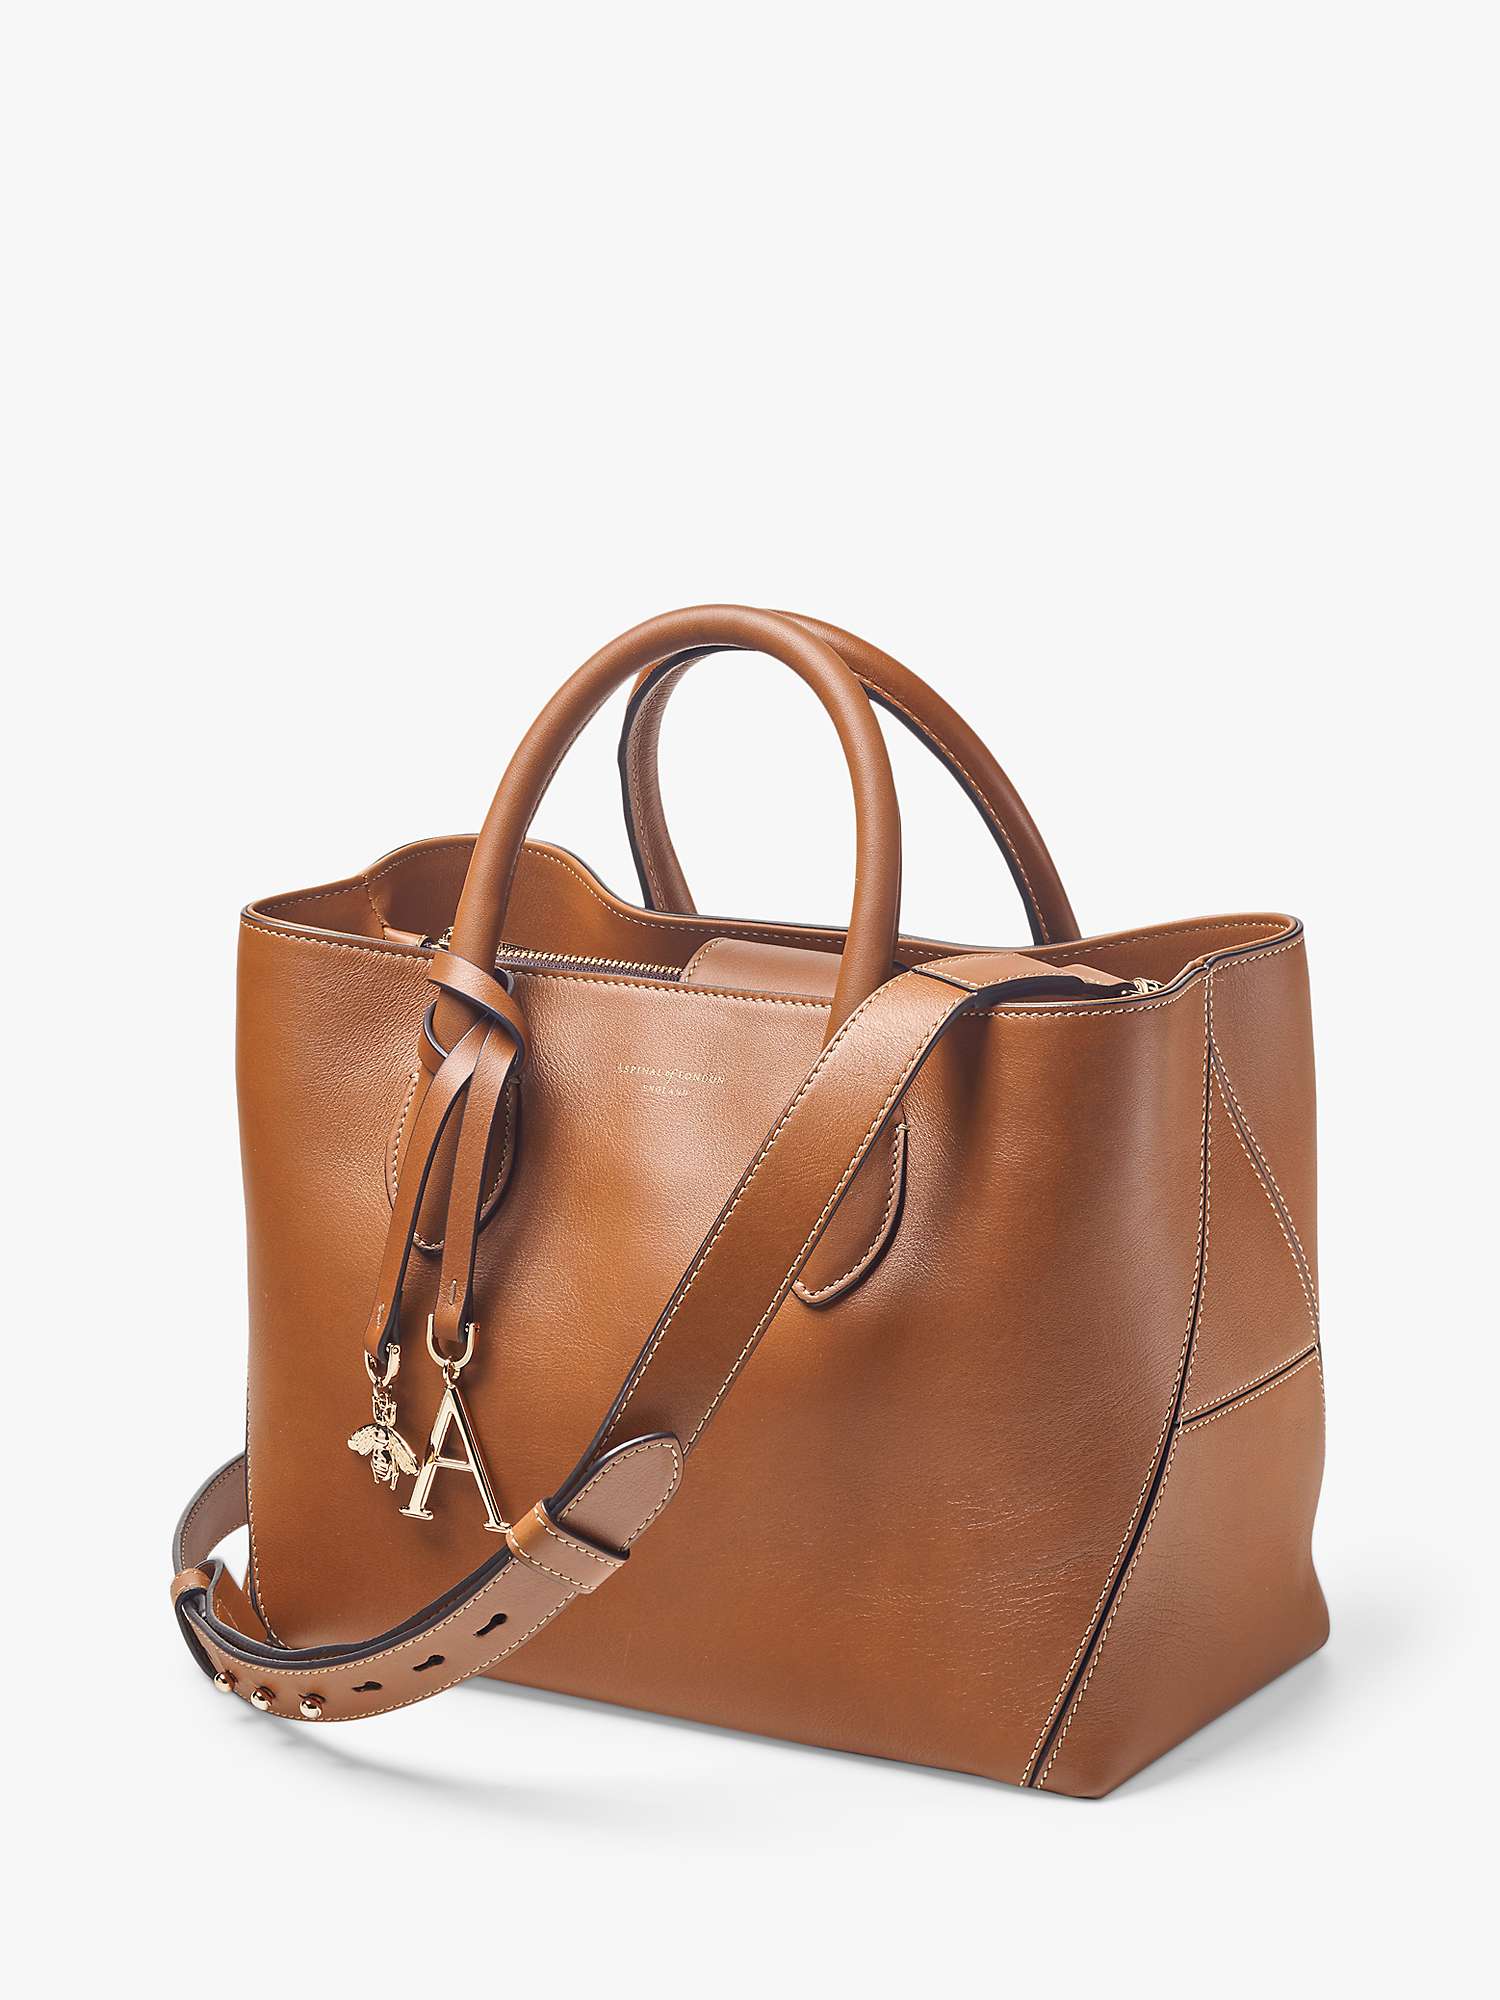 Buy Aspinal of London Midi London Smooth Leather Tote Bag, Tan Online at johnlewis.com